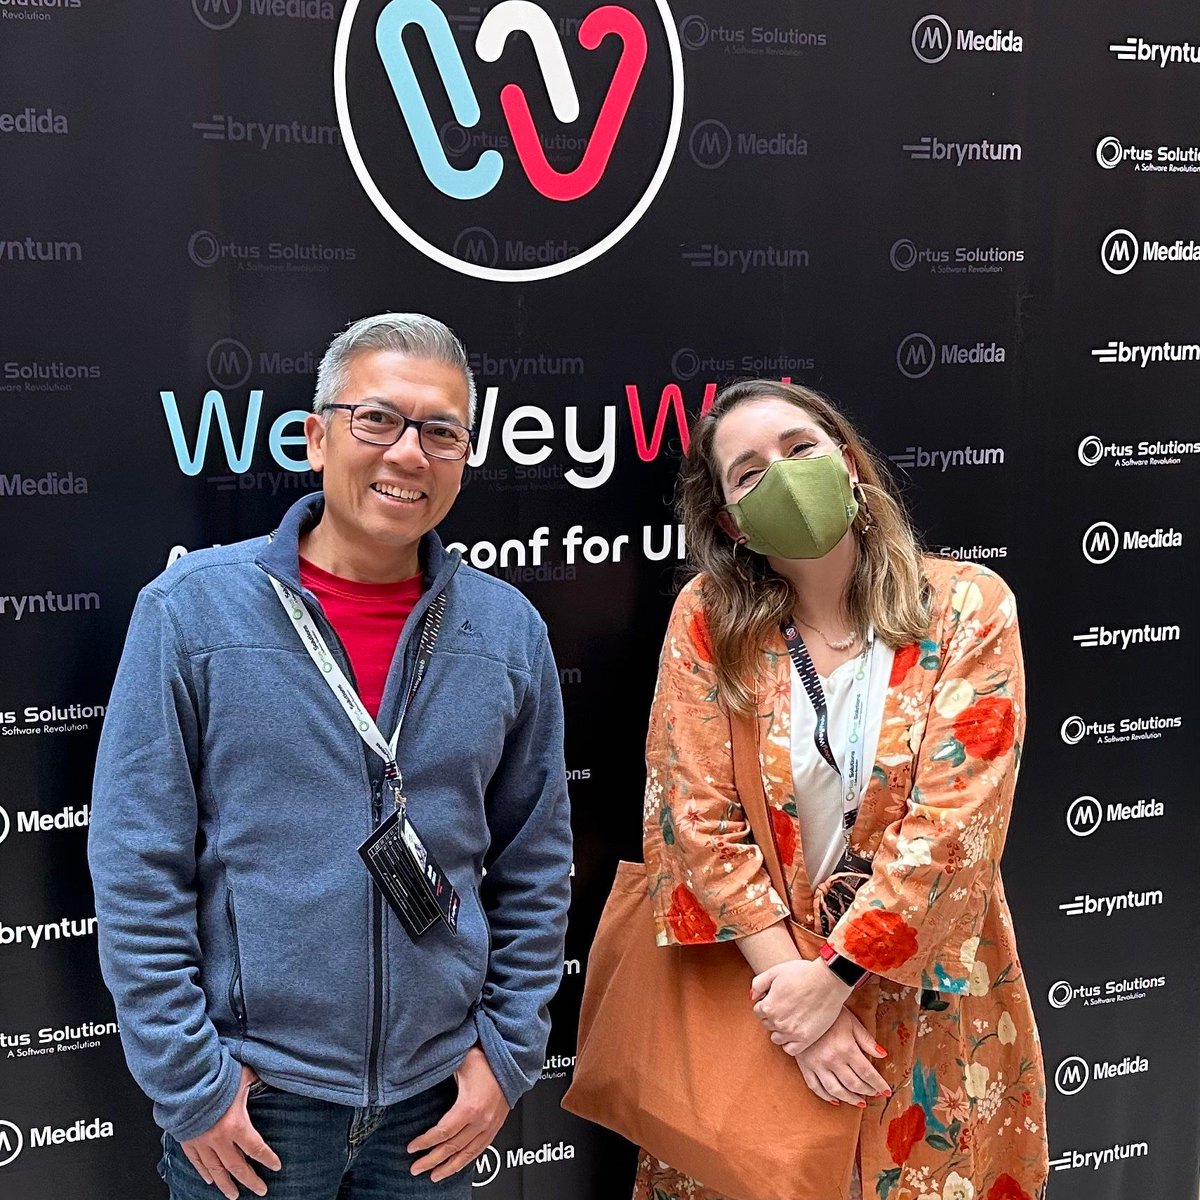 👋 Hey @WeyWeyWeb. @kvmaes and @LauraKalbag are both here for the next two days, and would love to meet you! And don’t miss Laura’s talk tomorrow afternoon 😊 #WeyWeyWeb23